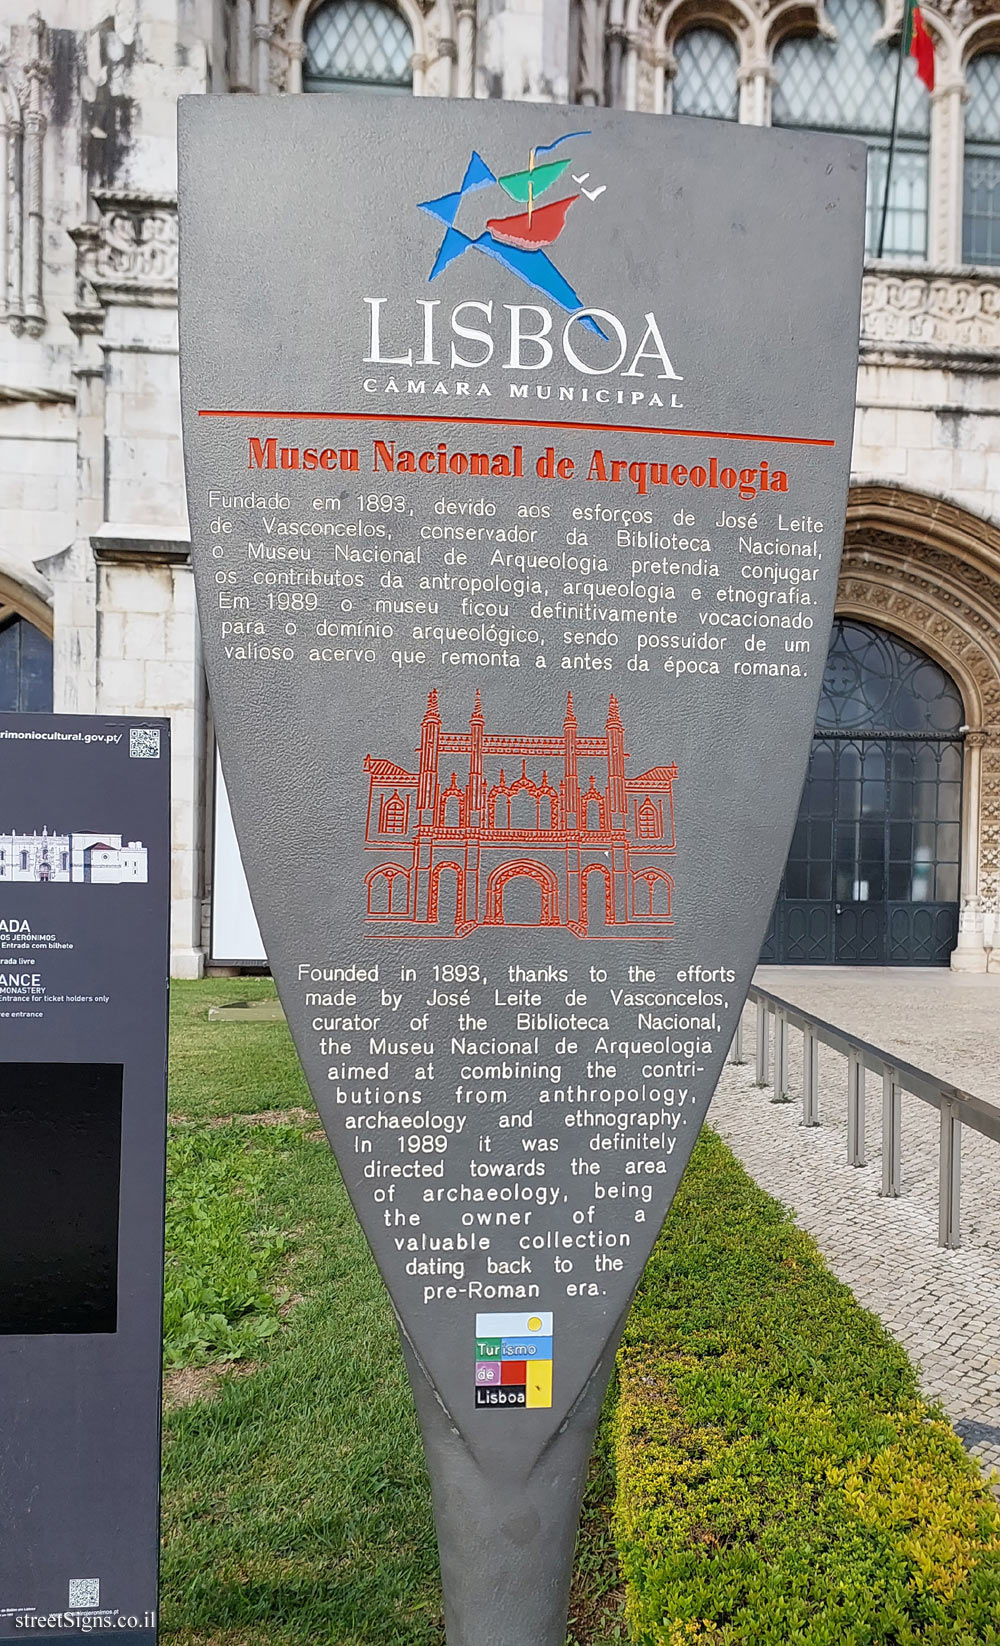 Lisbon - National Museum of Archaeology